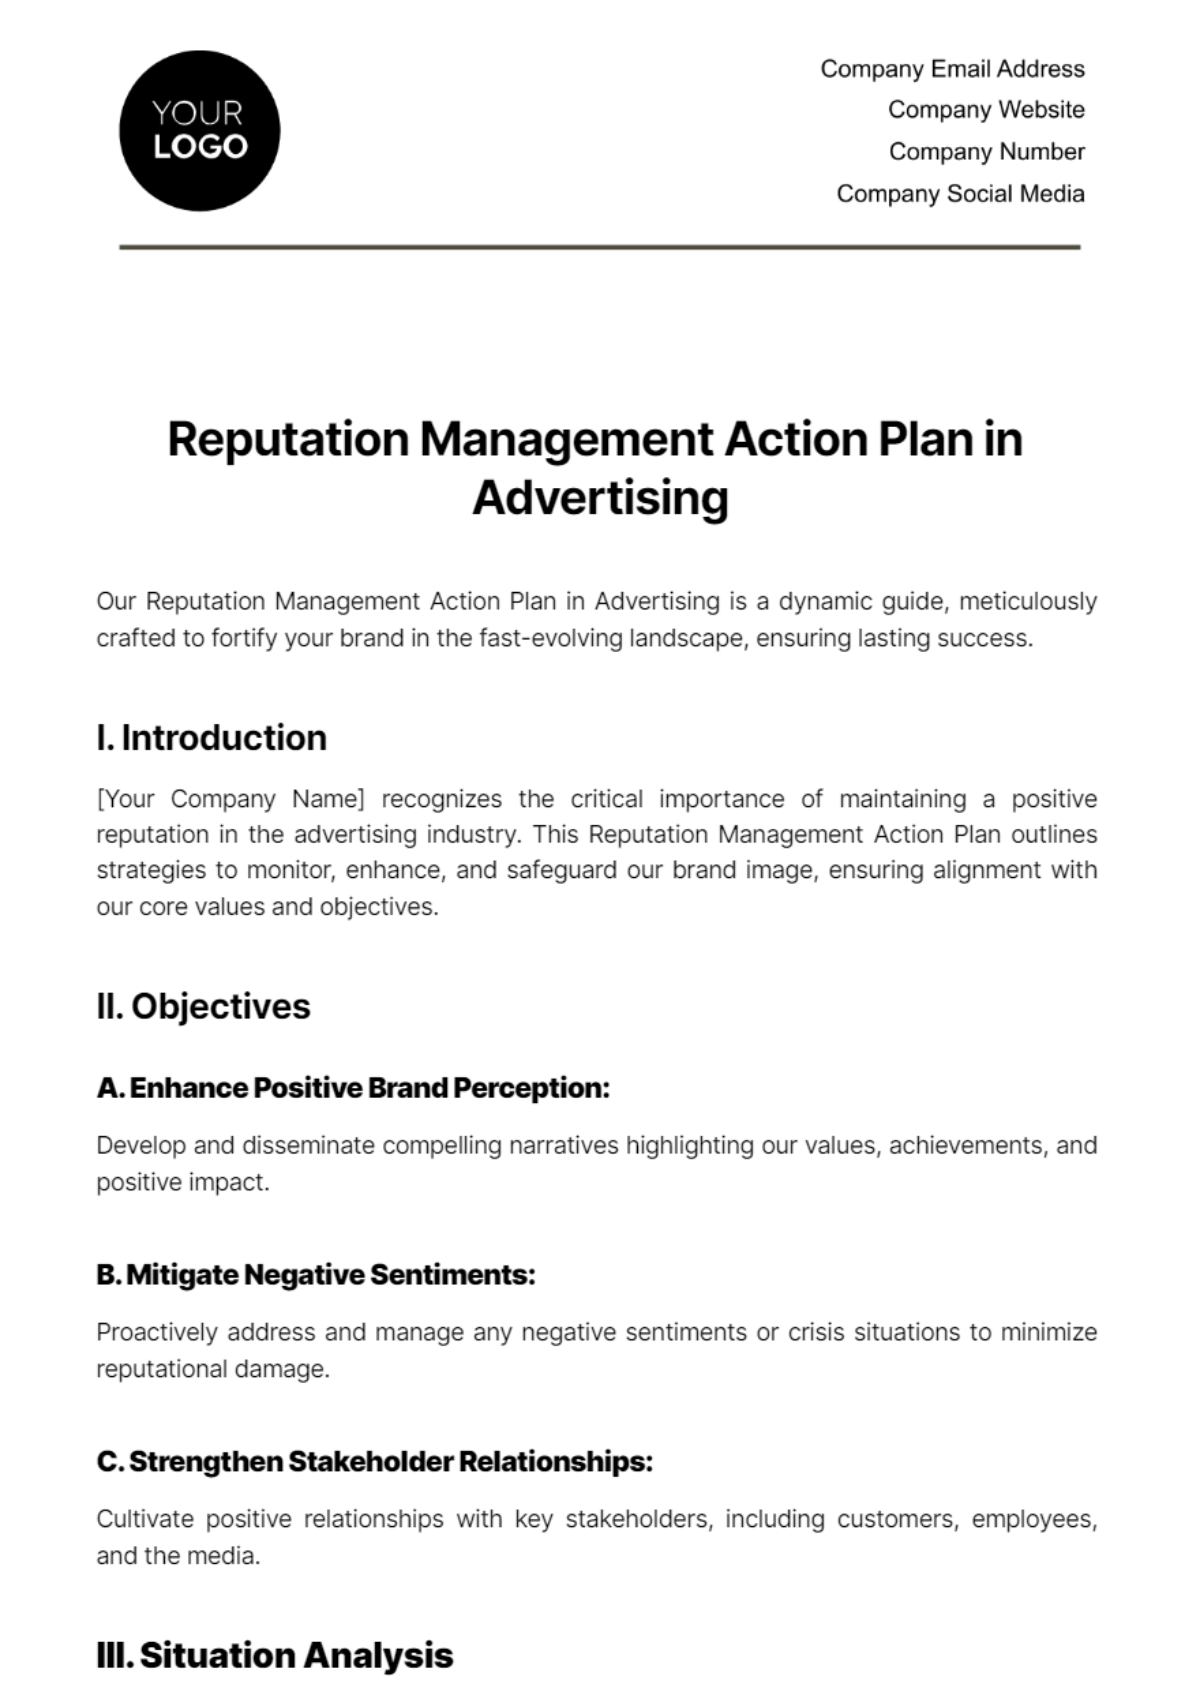 Reputation Management Action Plan in Advertising Template